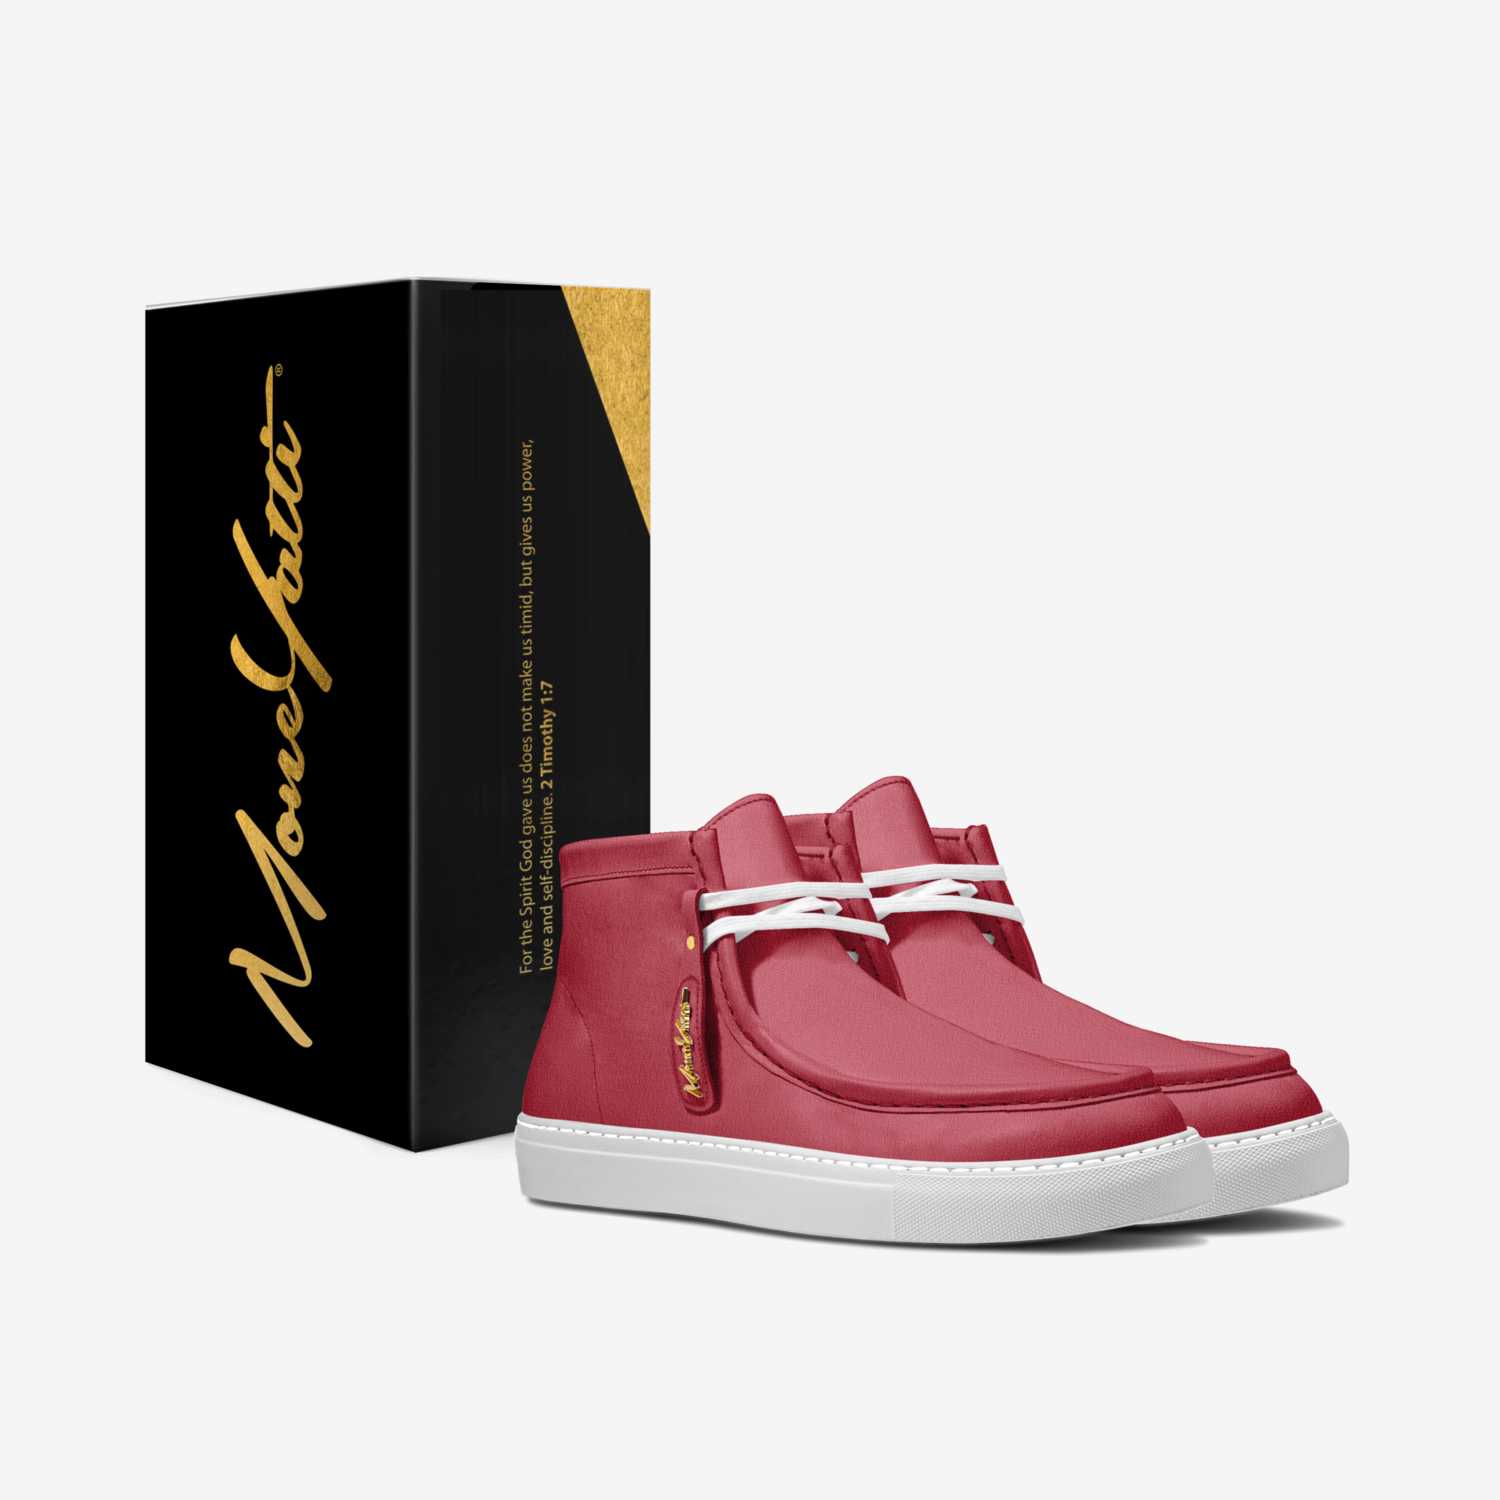 LUX SUEDE 006 custom made in Italy shoes by Moneyatti Brand | Box view